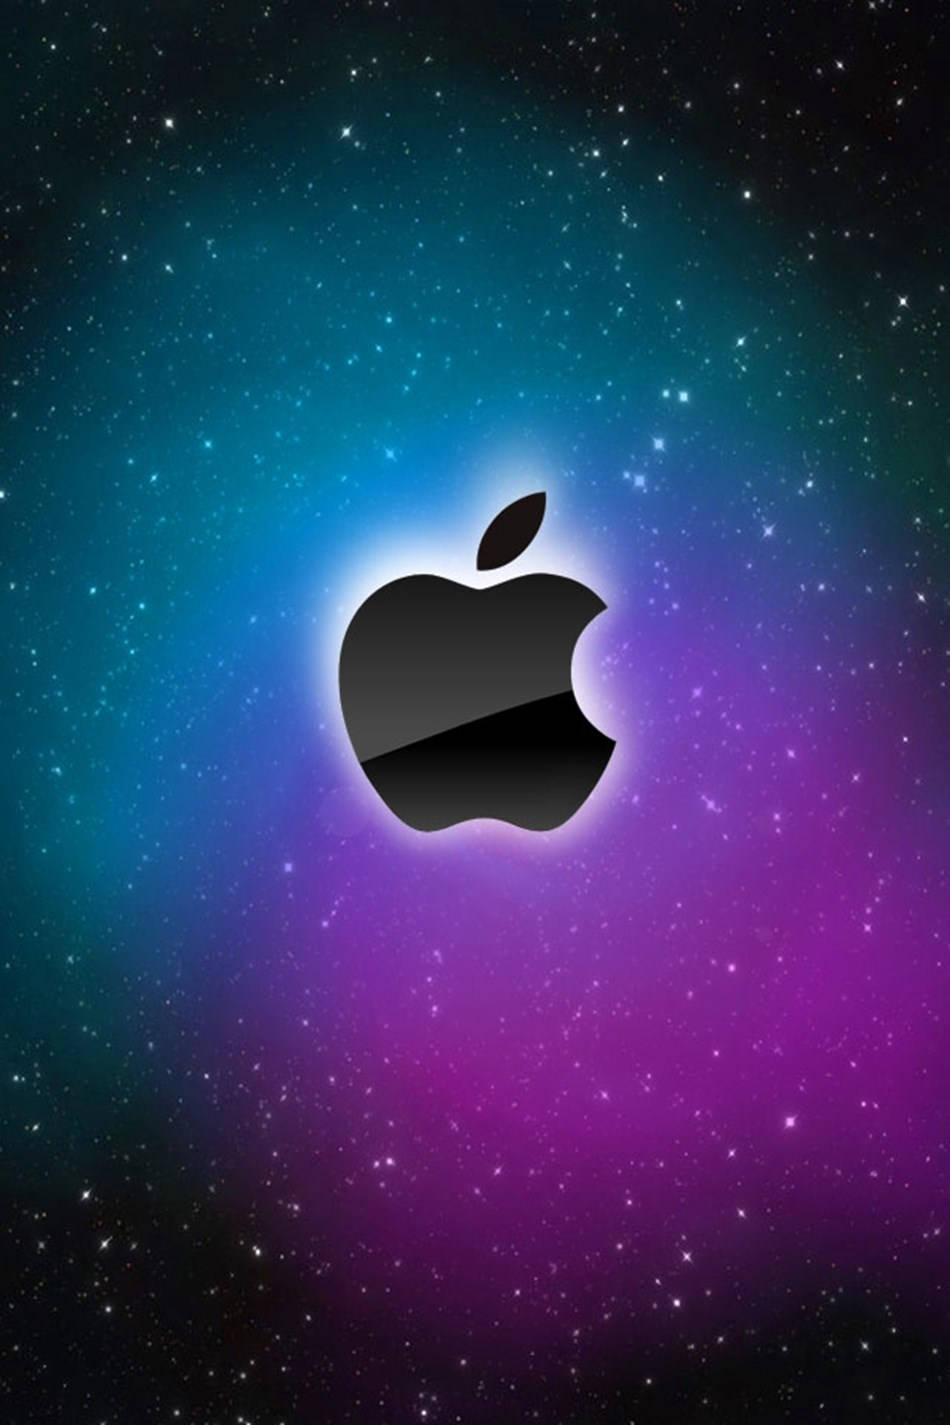 Download the new iPod touch 6th generation wallpapers